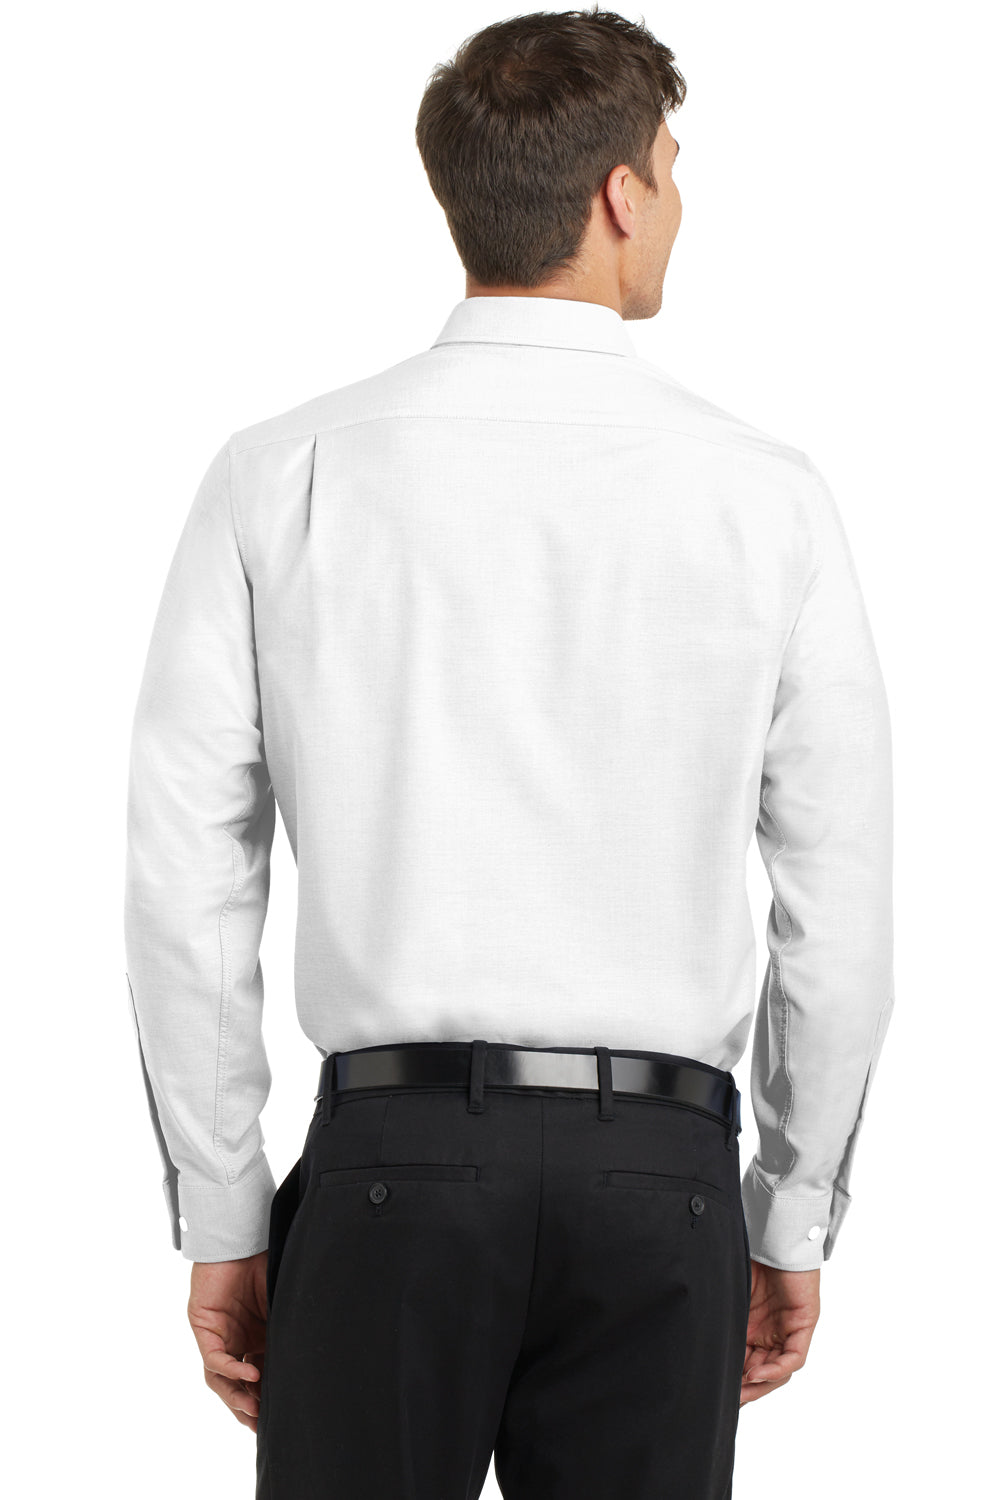 Port Authority S658 Mens SuperPro Oxford Wrinkle Resistant Long Sleeve Button Down Shirt w/ Pocket White Back